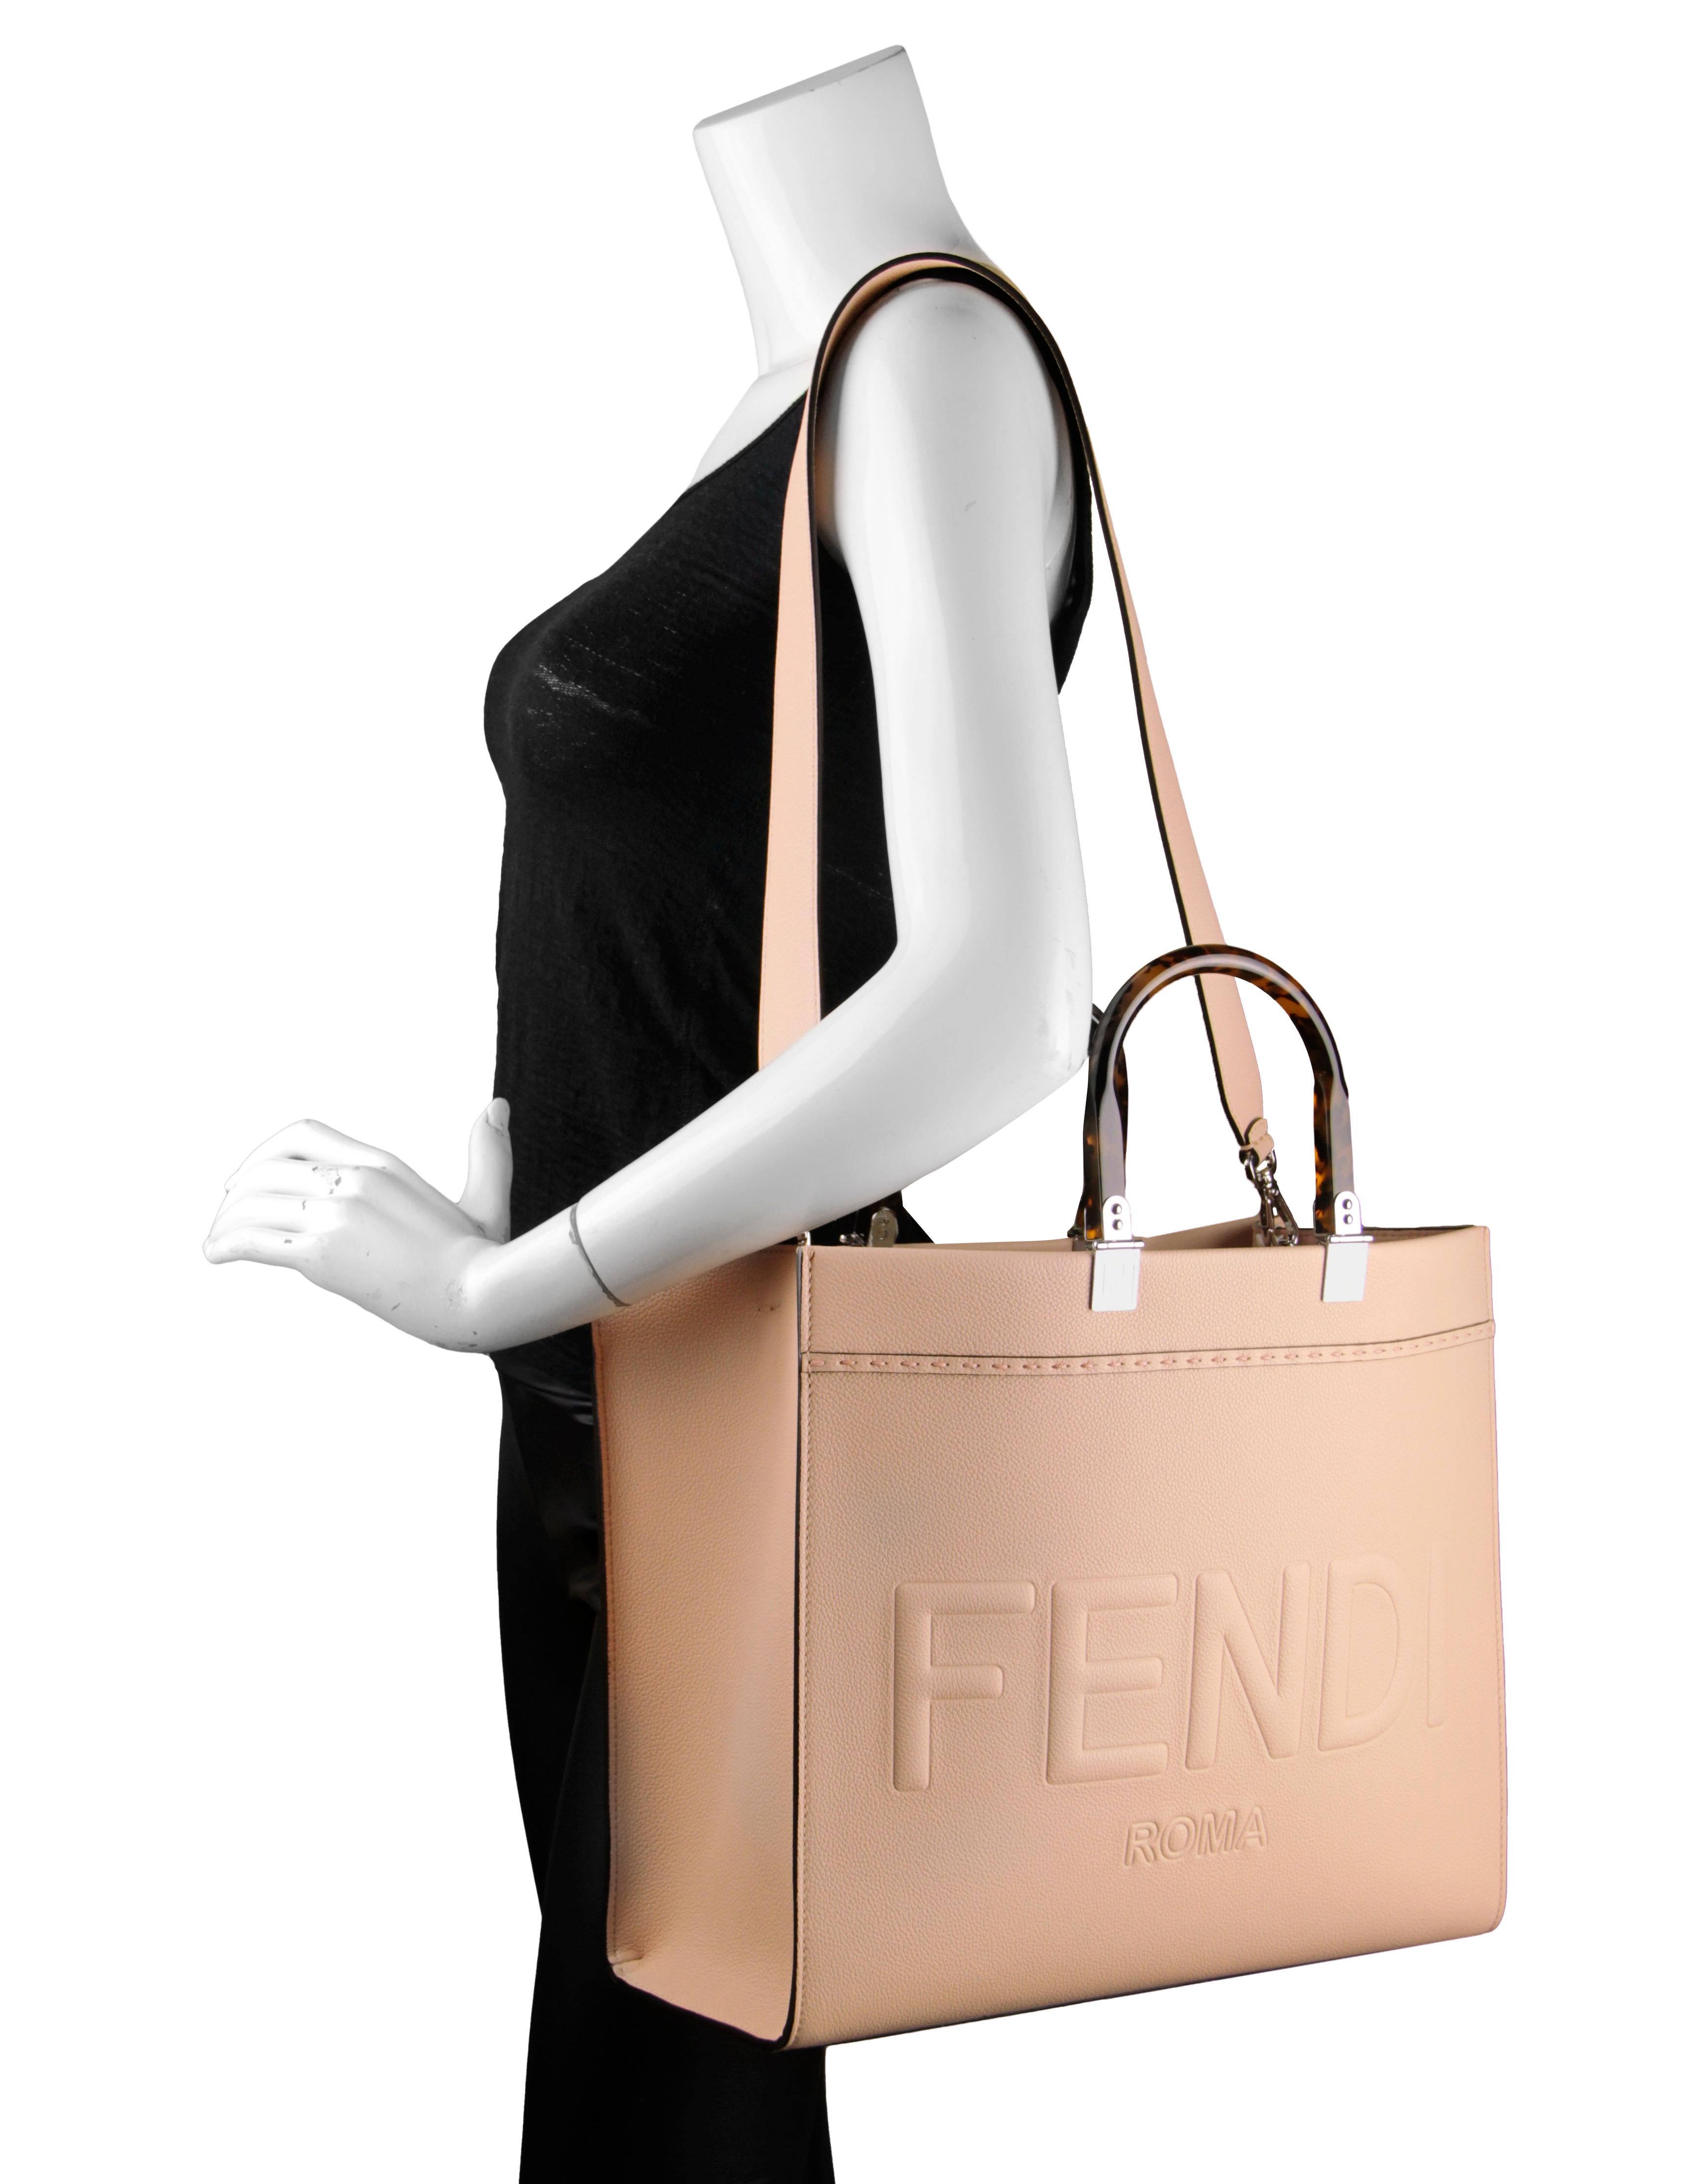 Fendi Pink Vitello Cher Plexiglass Medium Fendi Sunshine Shopper Tote Bag with Tortoise Handles
Made In: Italy
Year of Production: 2022
Color: Light rose pink
Hardware: Silvertone
Materials: Grained calf leather
Lining: Suede
Closure/Opening: Open